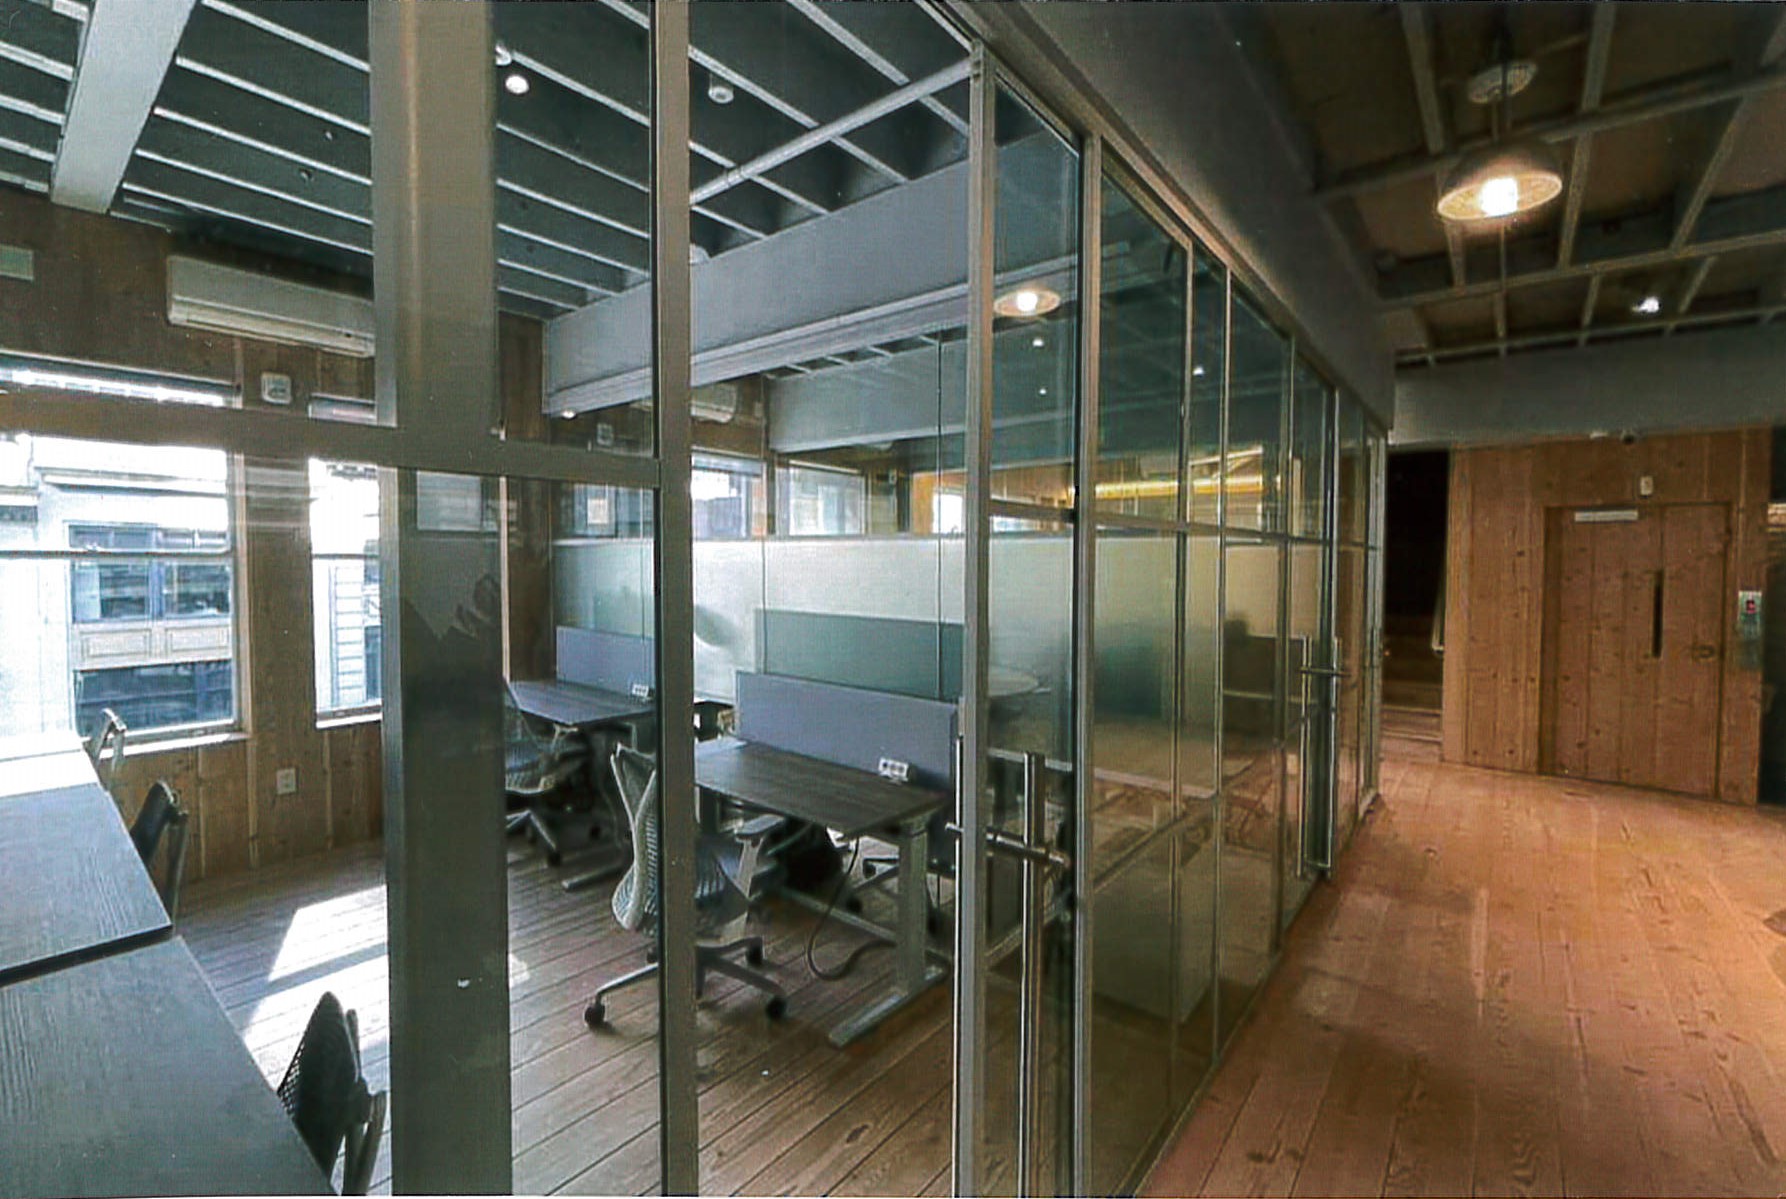 Renovated office space, with elevator in view